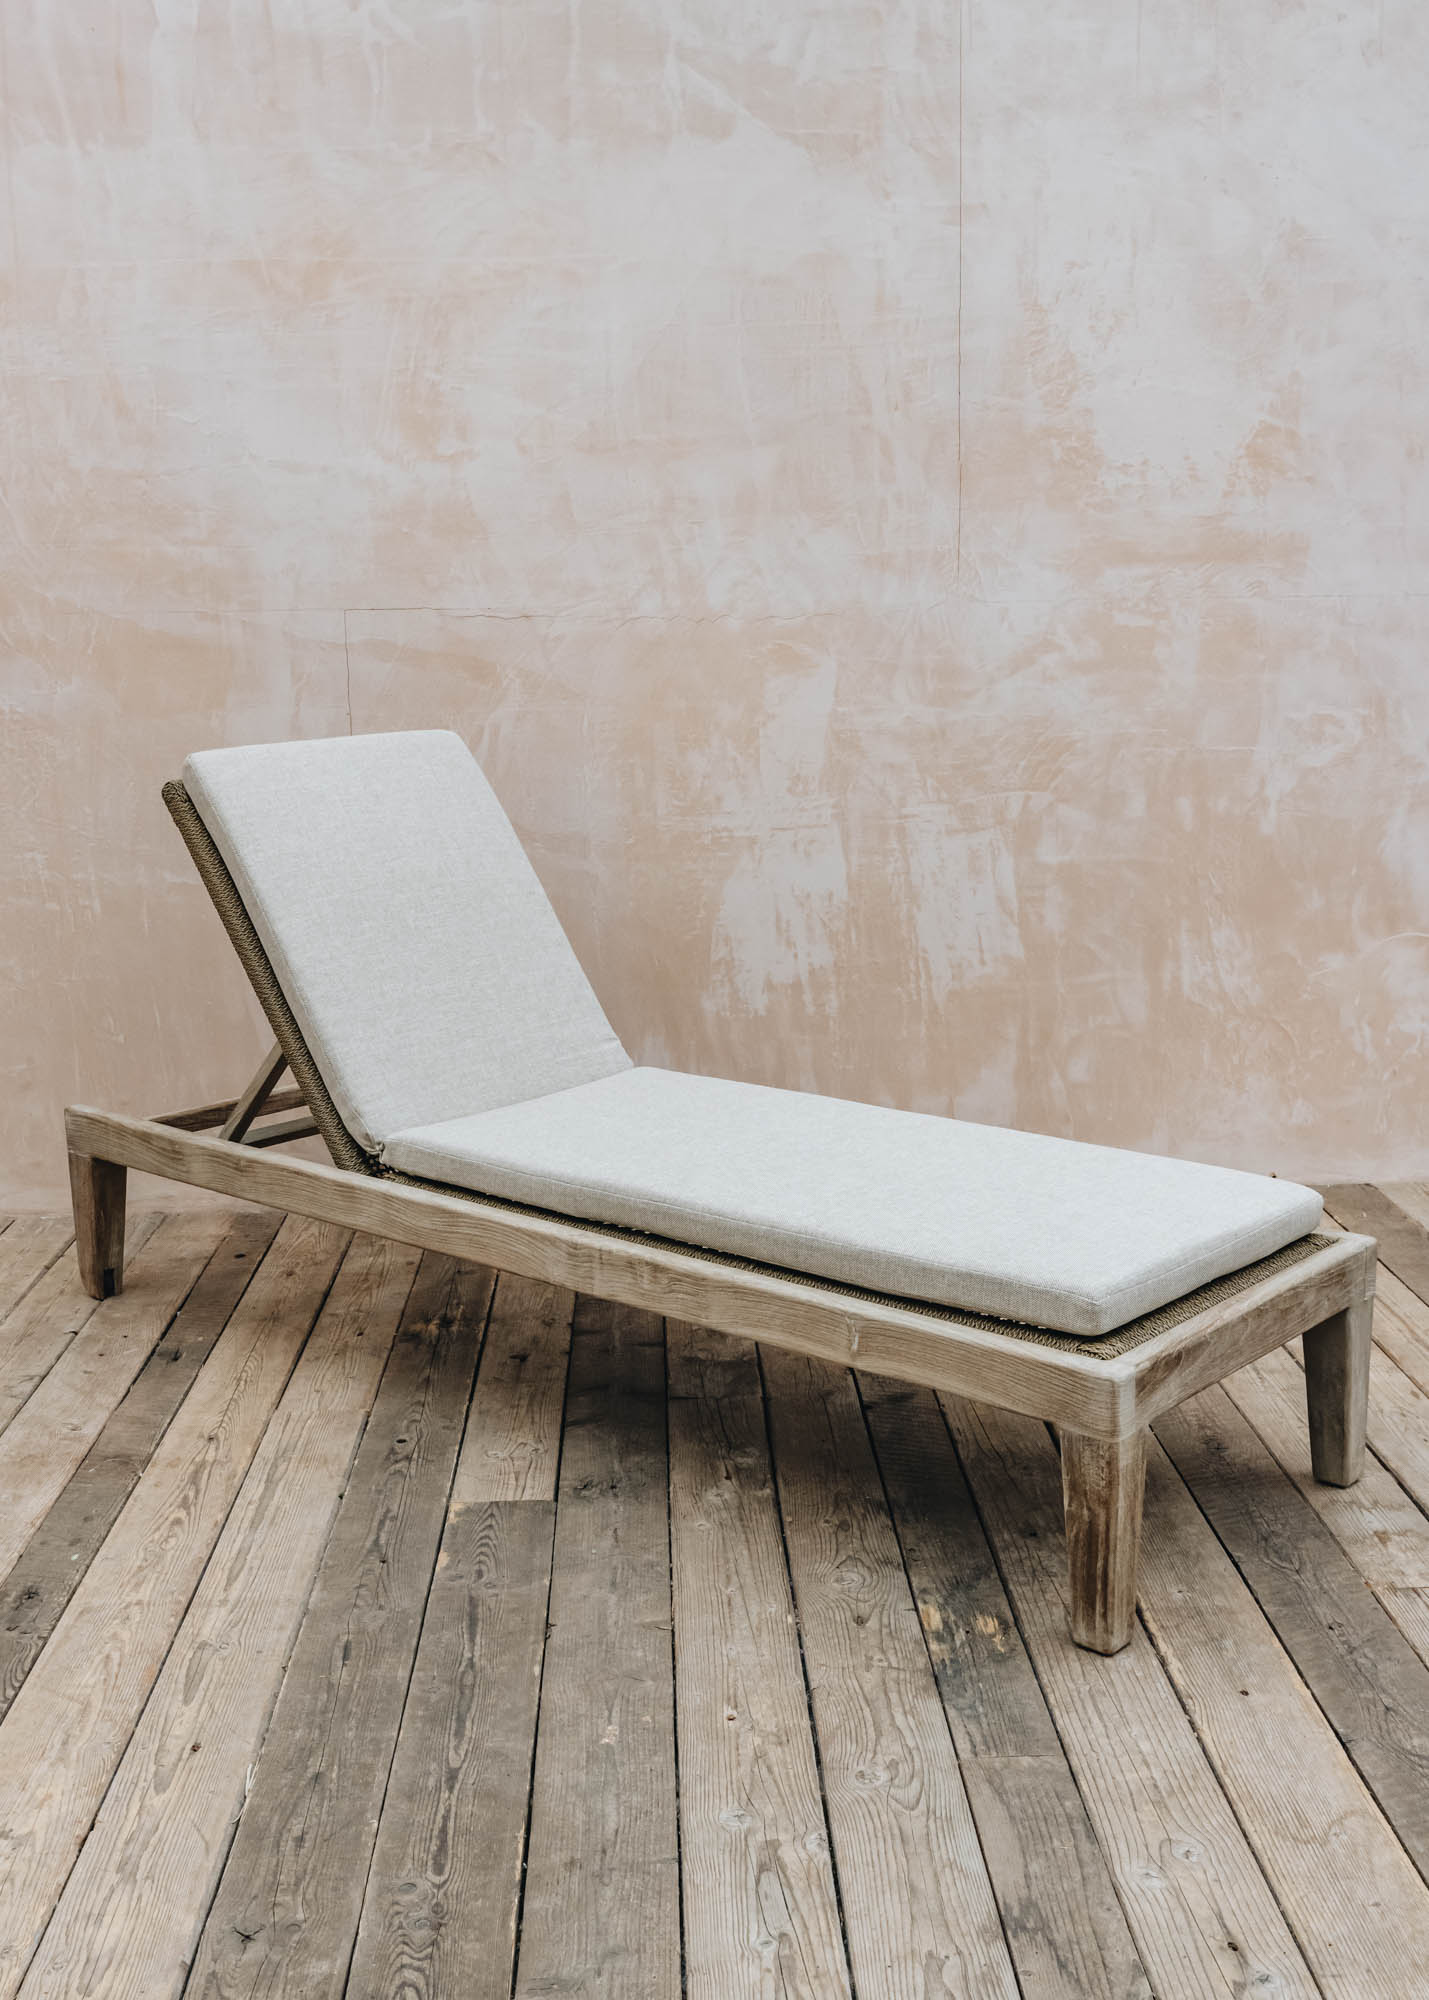 Gommaire Lisa Sunlounger with Cushion